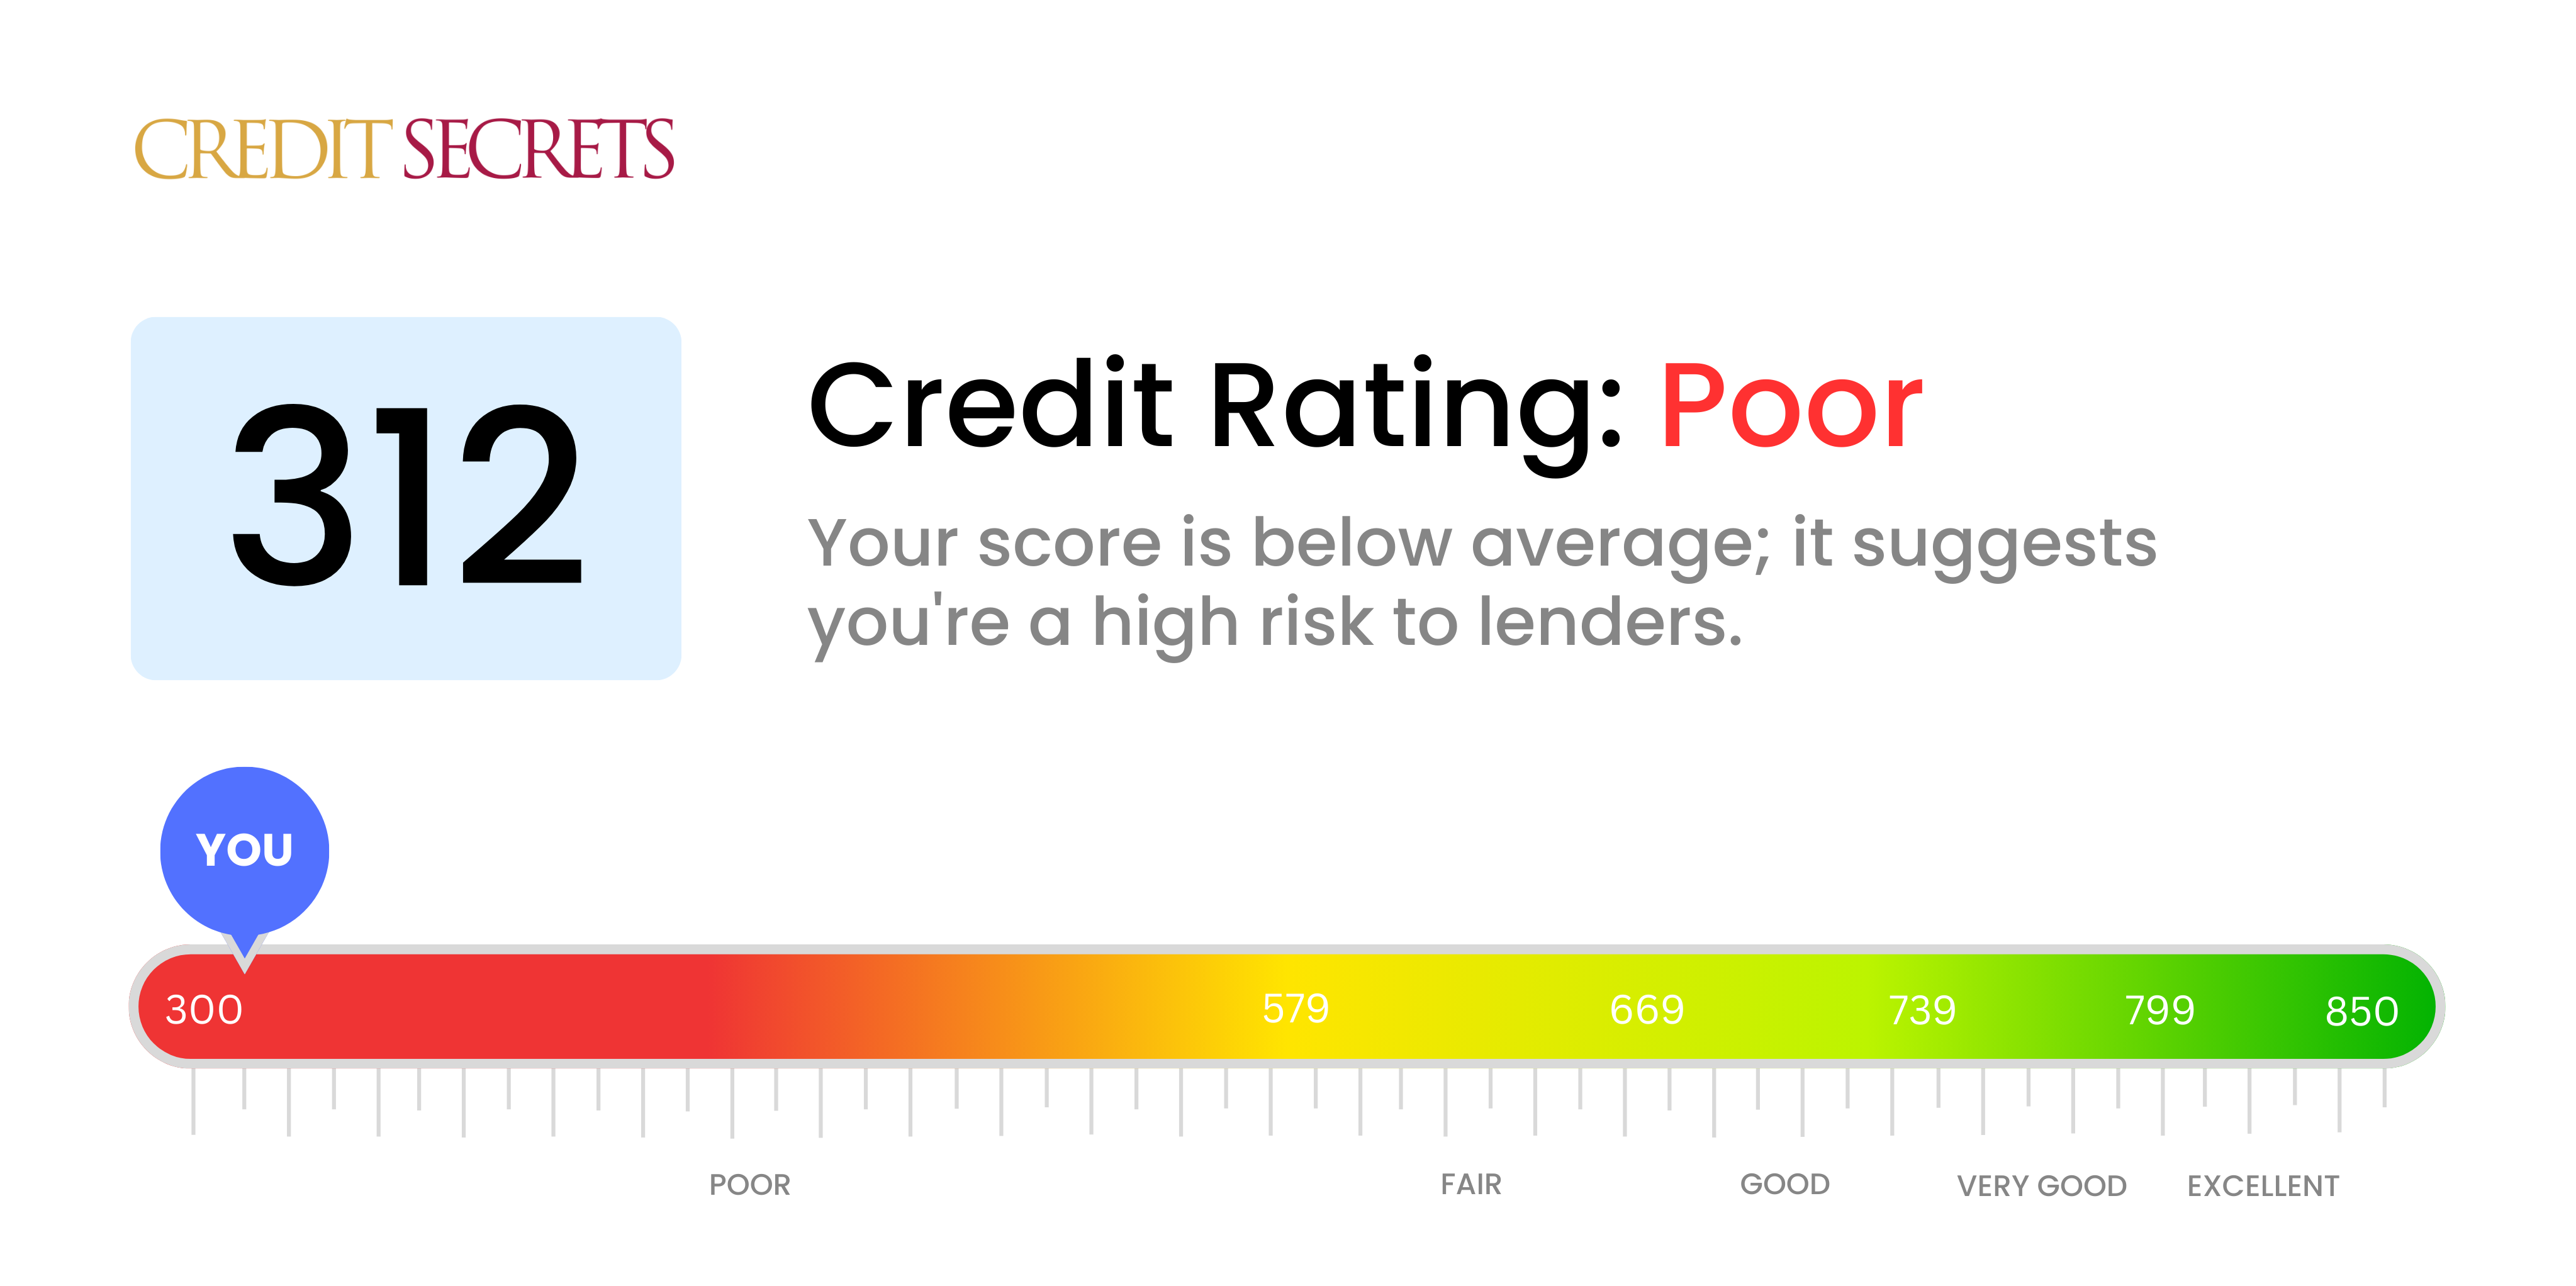 Is 312 a good credit score?